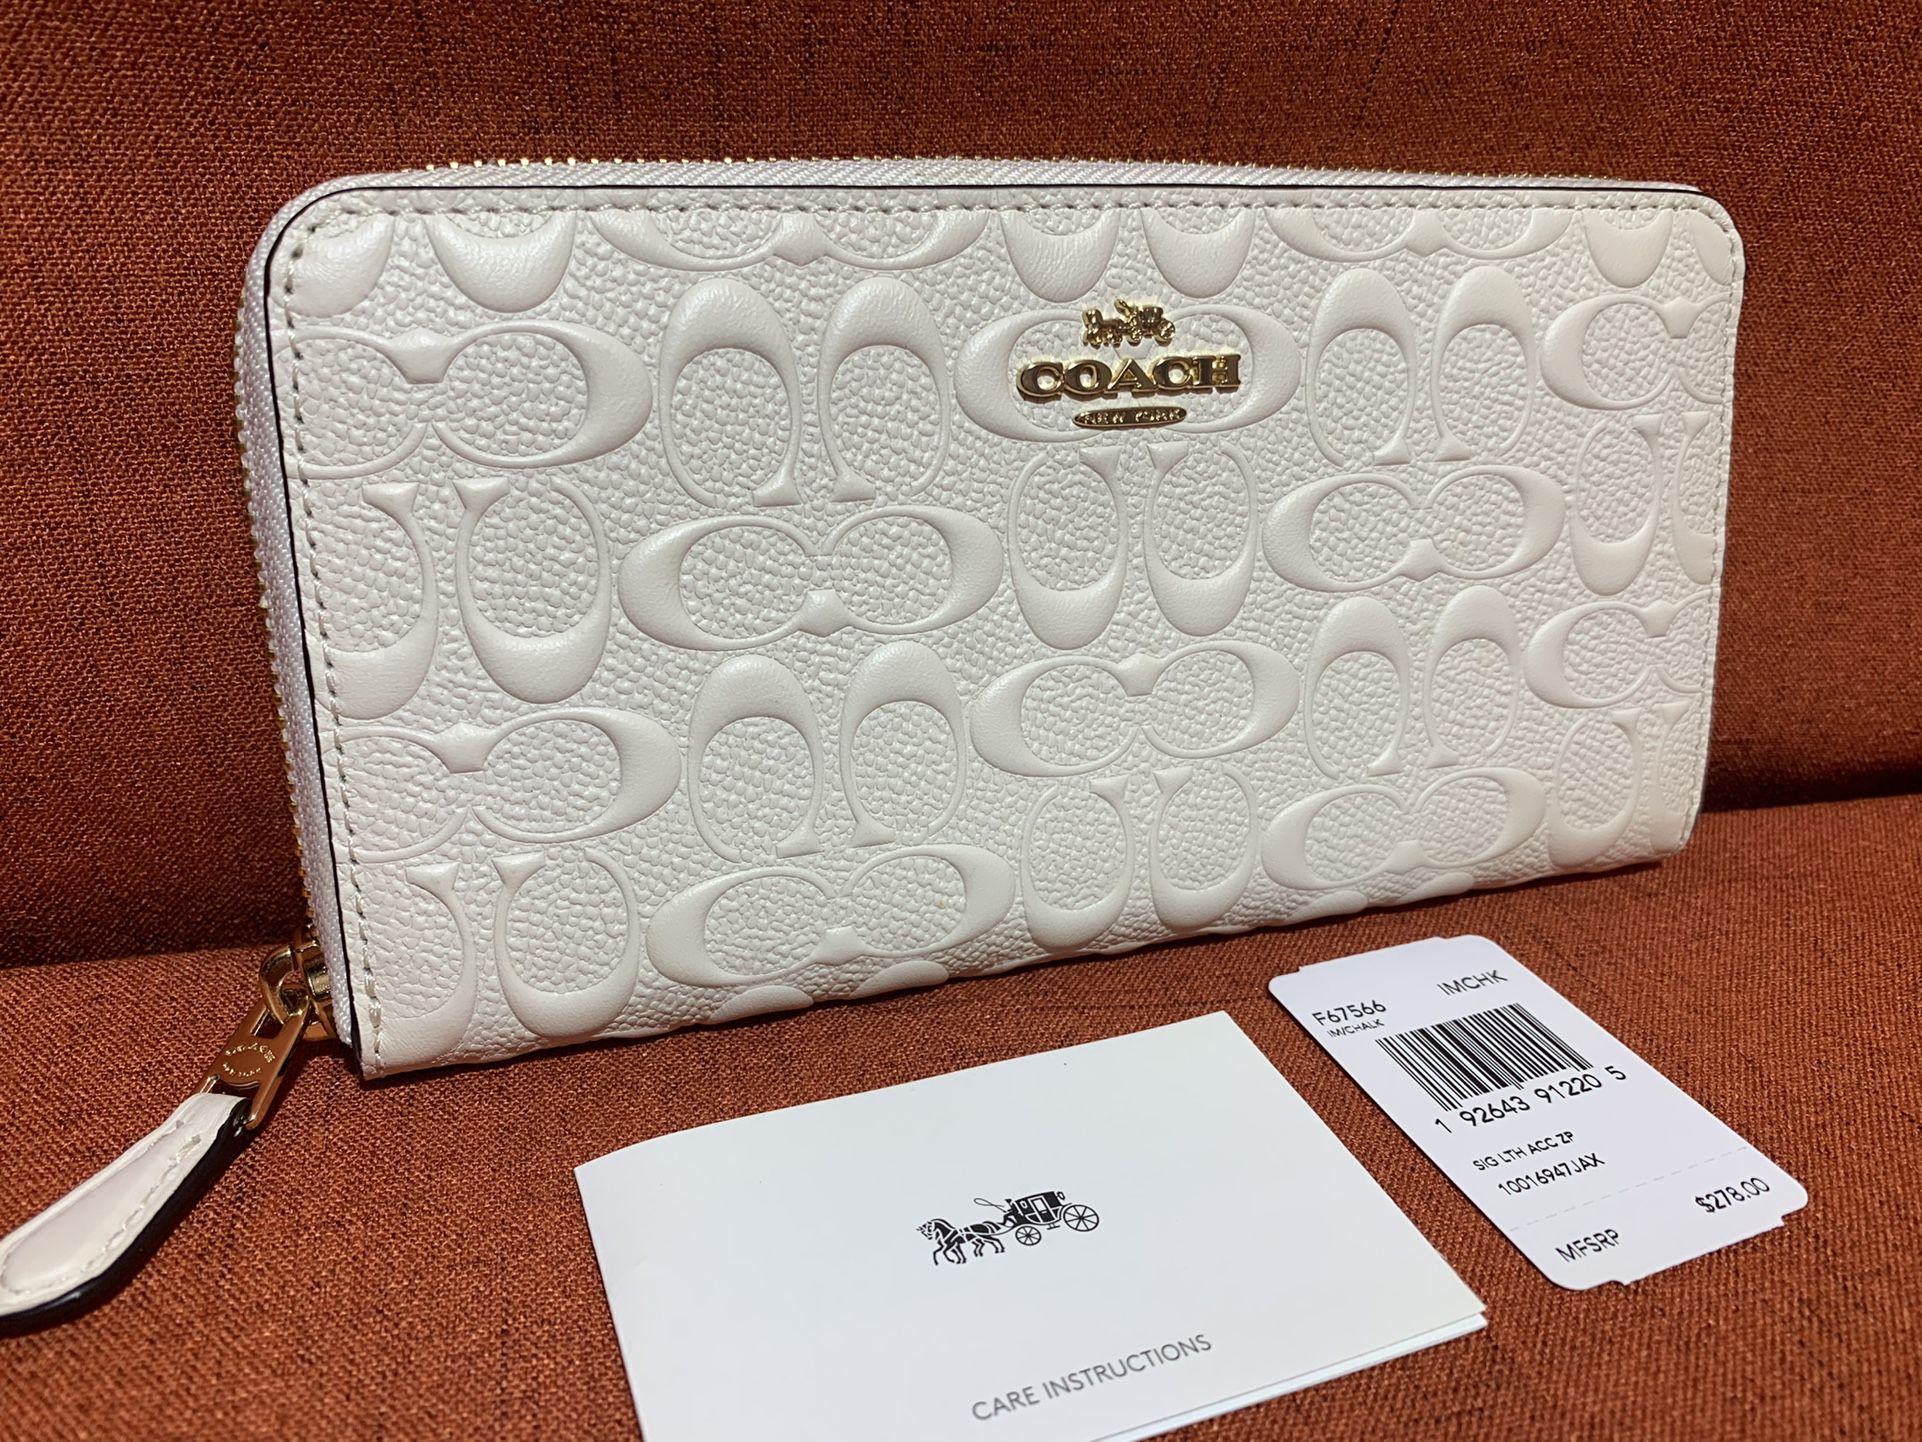 Coach Accordion Zip wallet signature floral flower pink for Sale in Aloma,  FL - OfferUp